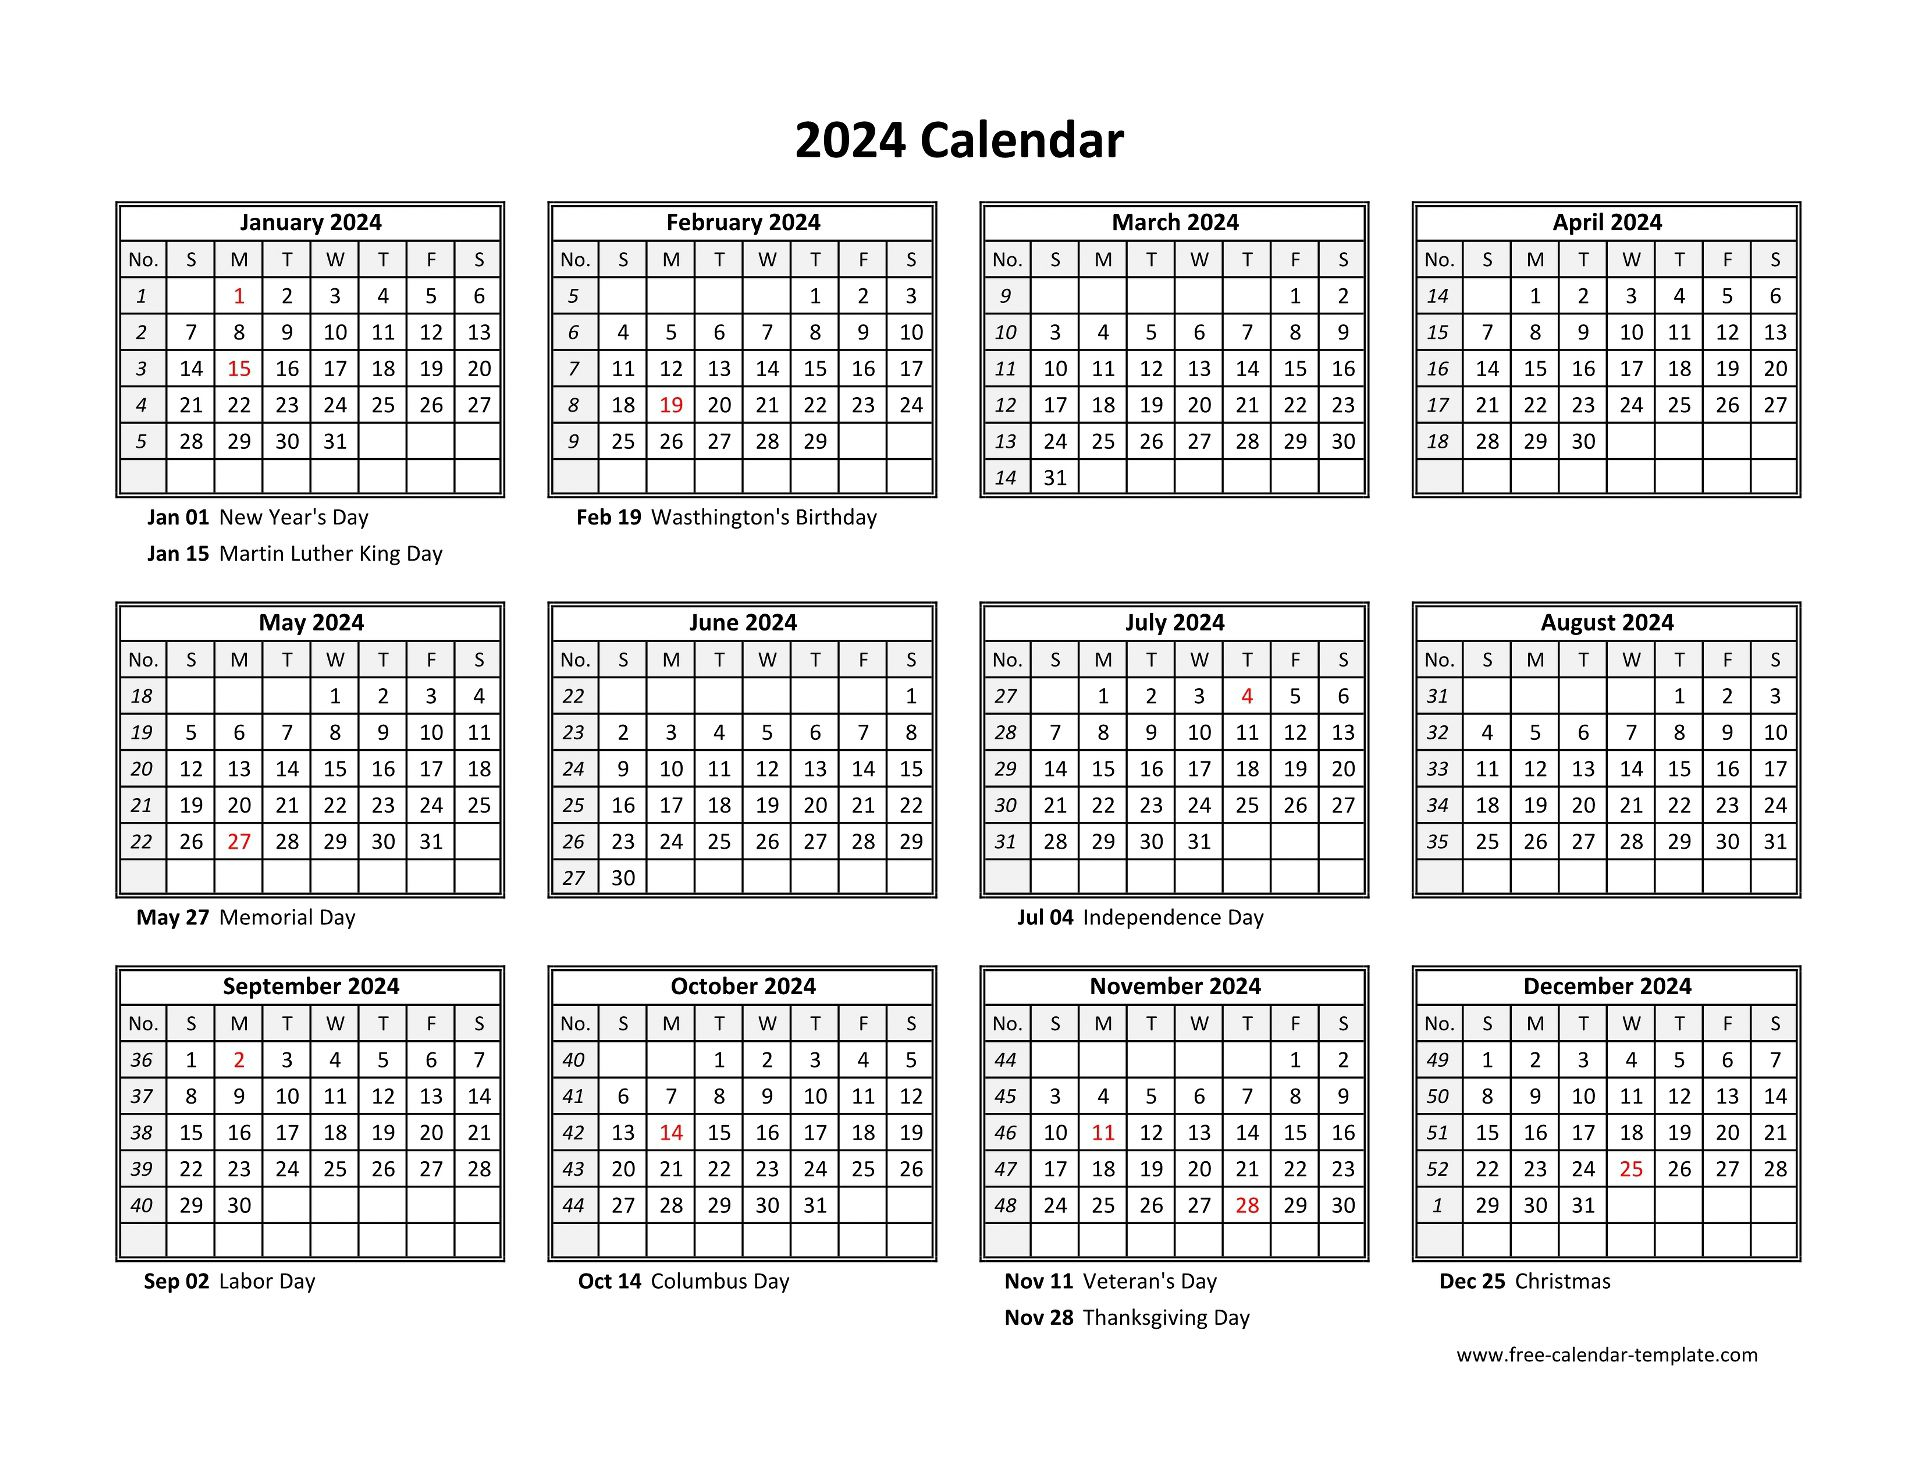 Yearly Calendar 2024 Printable With Federal Holidays | Free for 2024 Calendar Printable Yearly